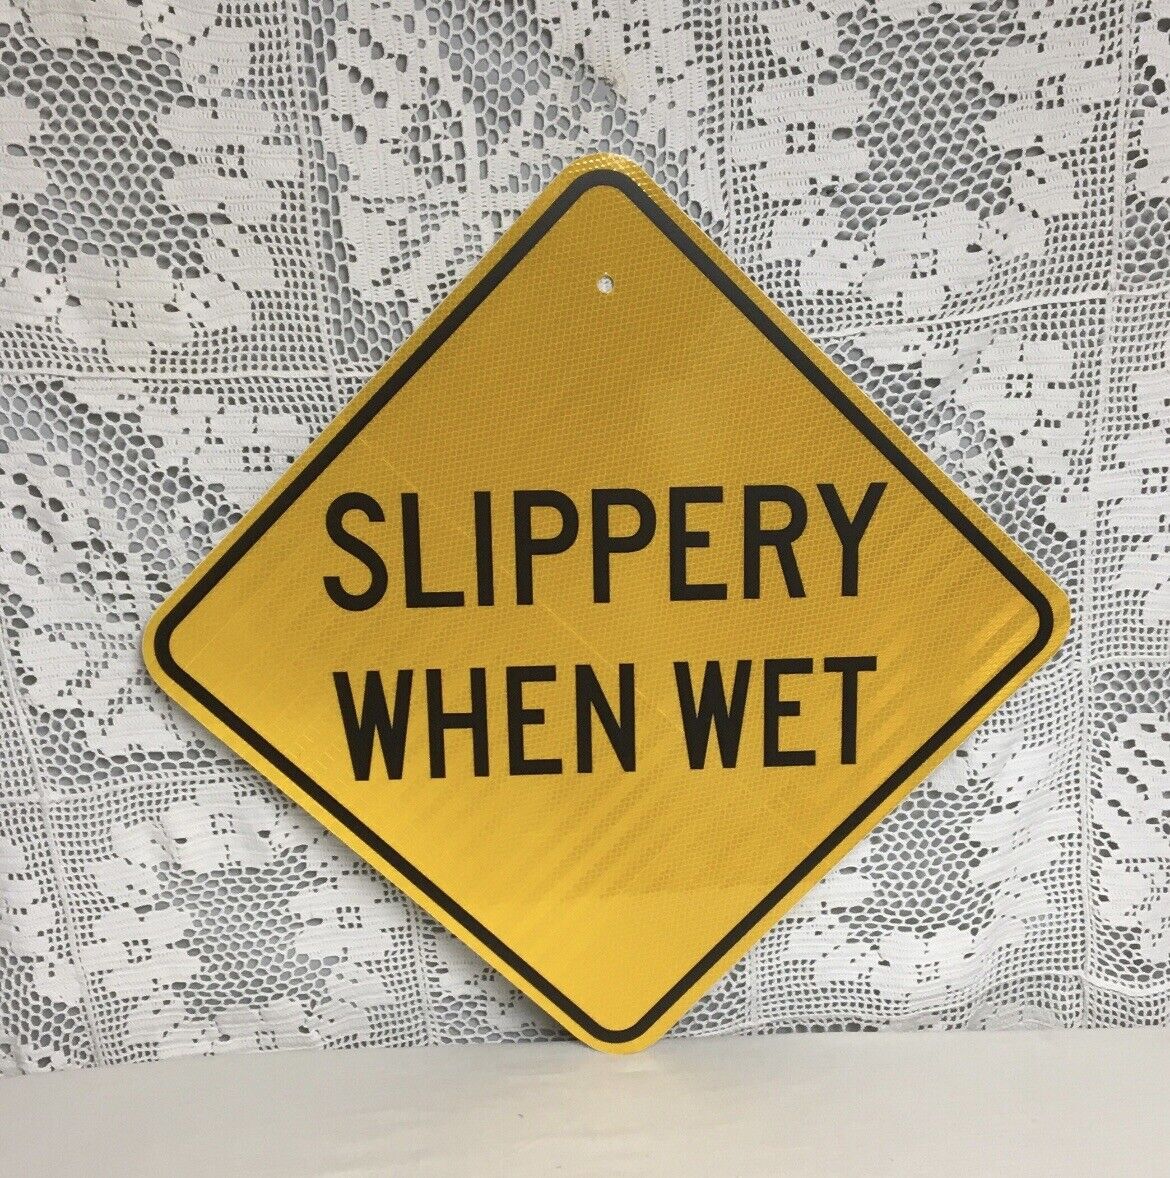 Real Pennsylvania Slippery When Wet Street Road Sign